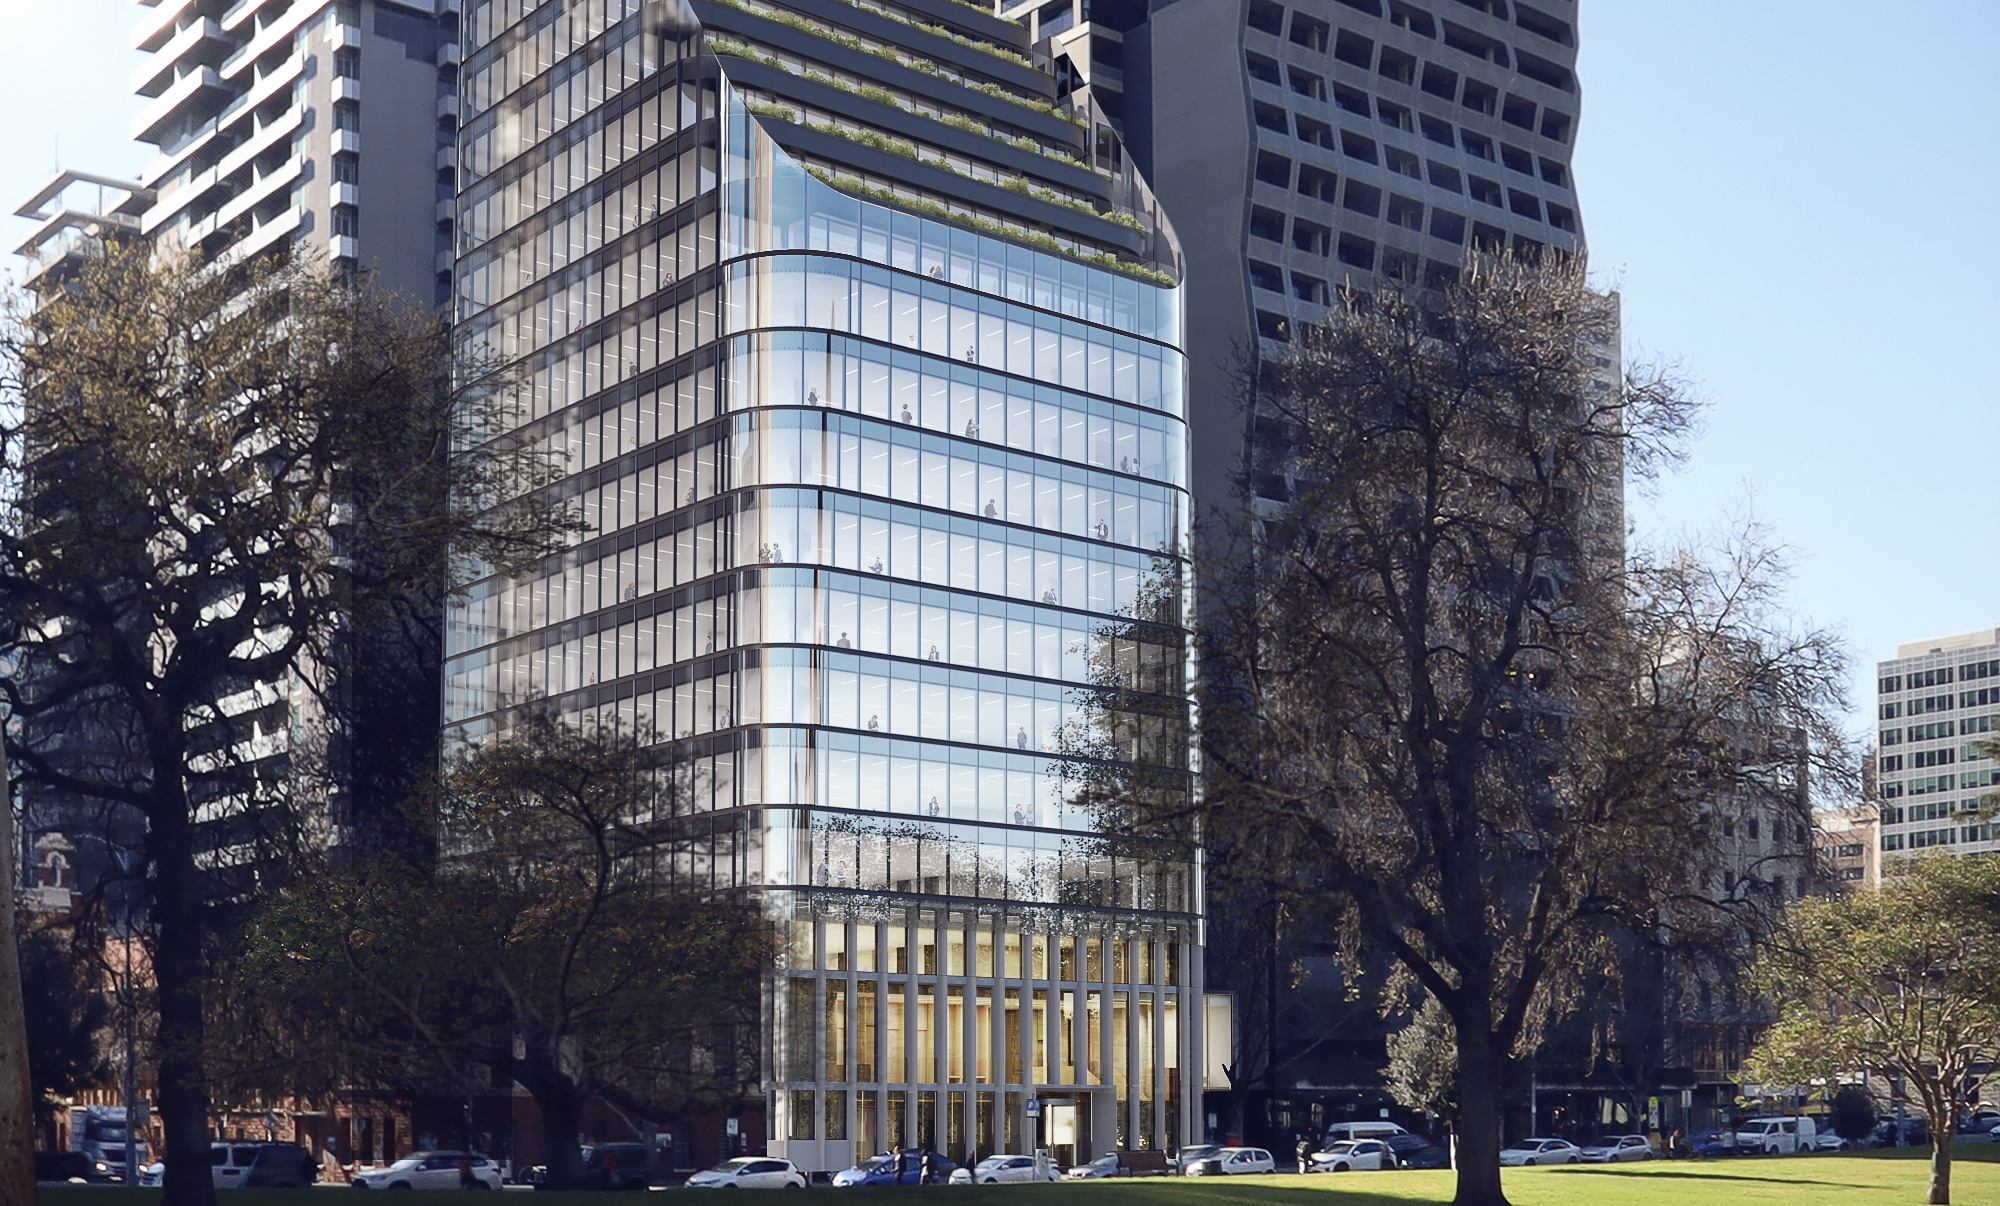 As Melbourne office assets become sought-after, new CBD development offers opportunity